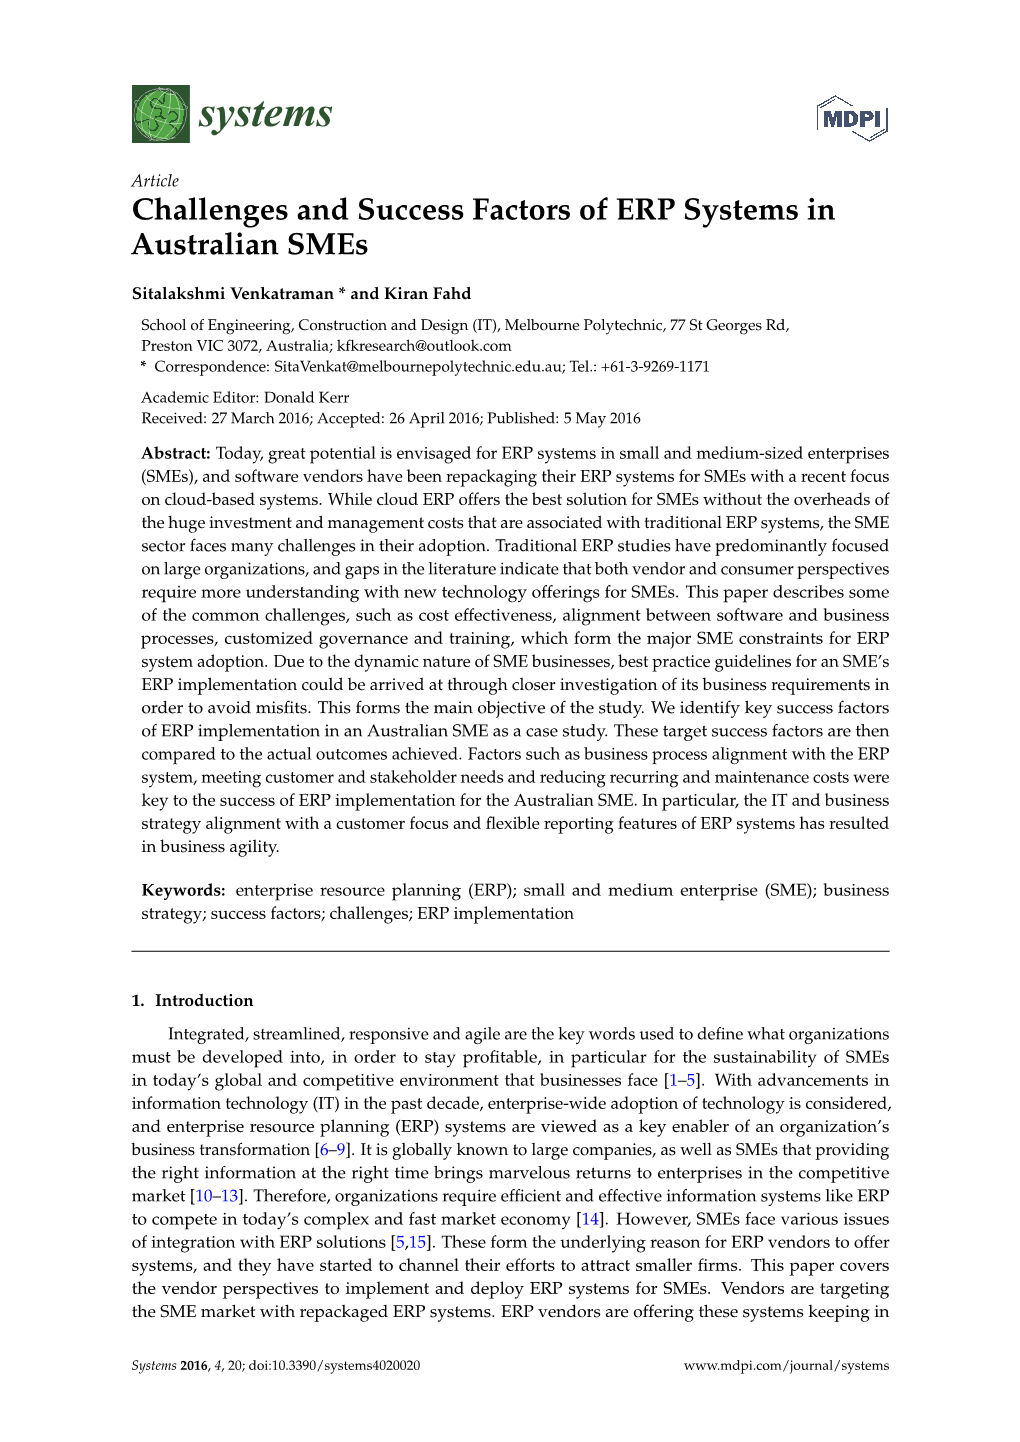 Challenges and Success Factors of ERP Systems in Australian Smes